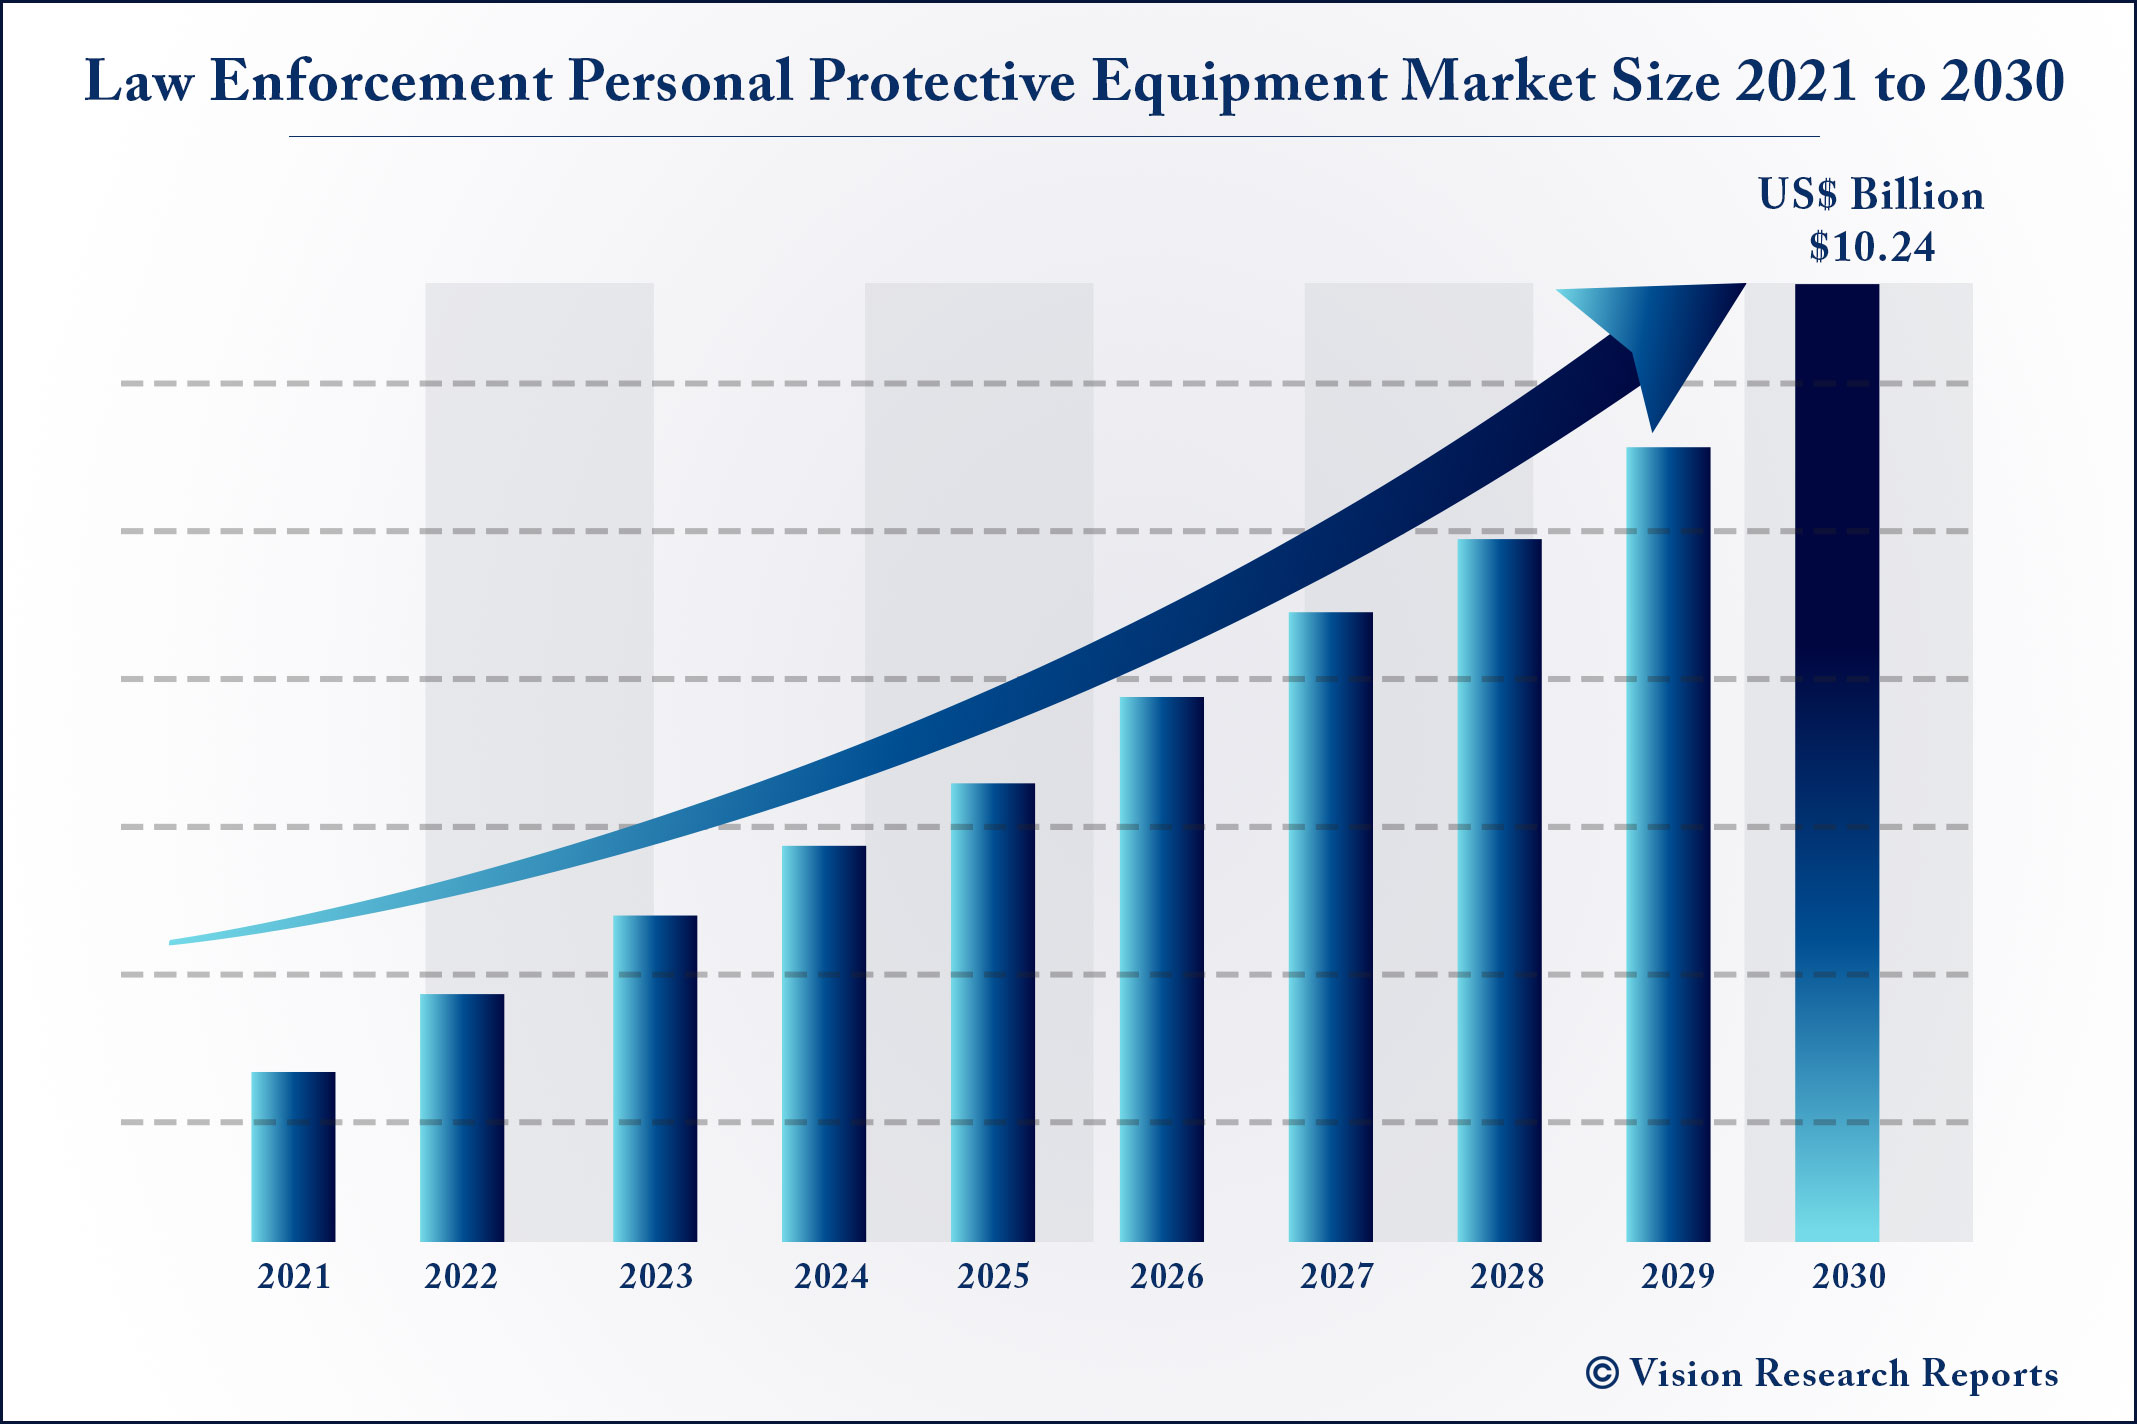 Law Enforcement Personal Protective Equipment Market Size 2021 to 2030